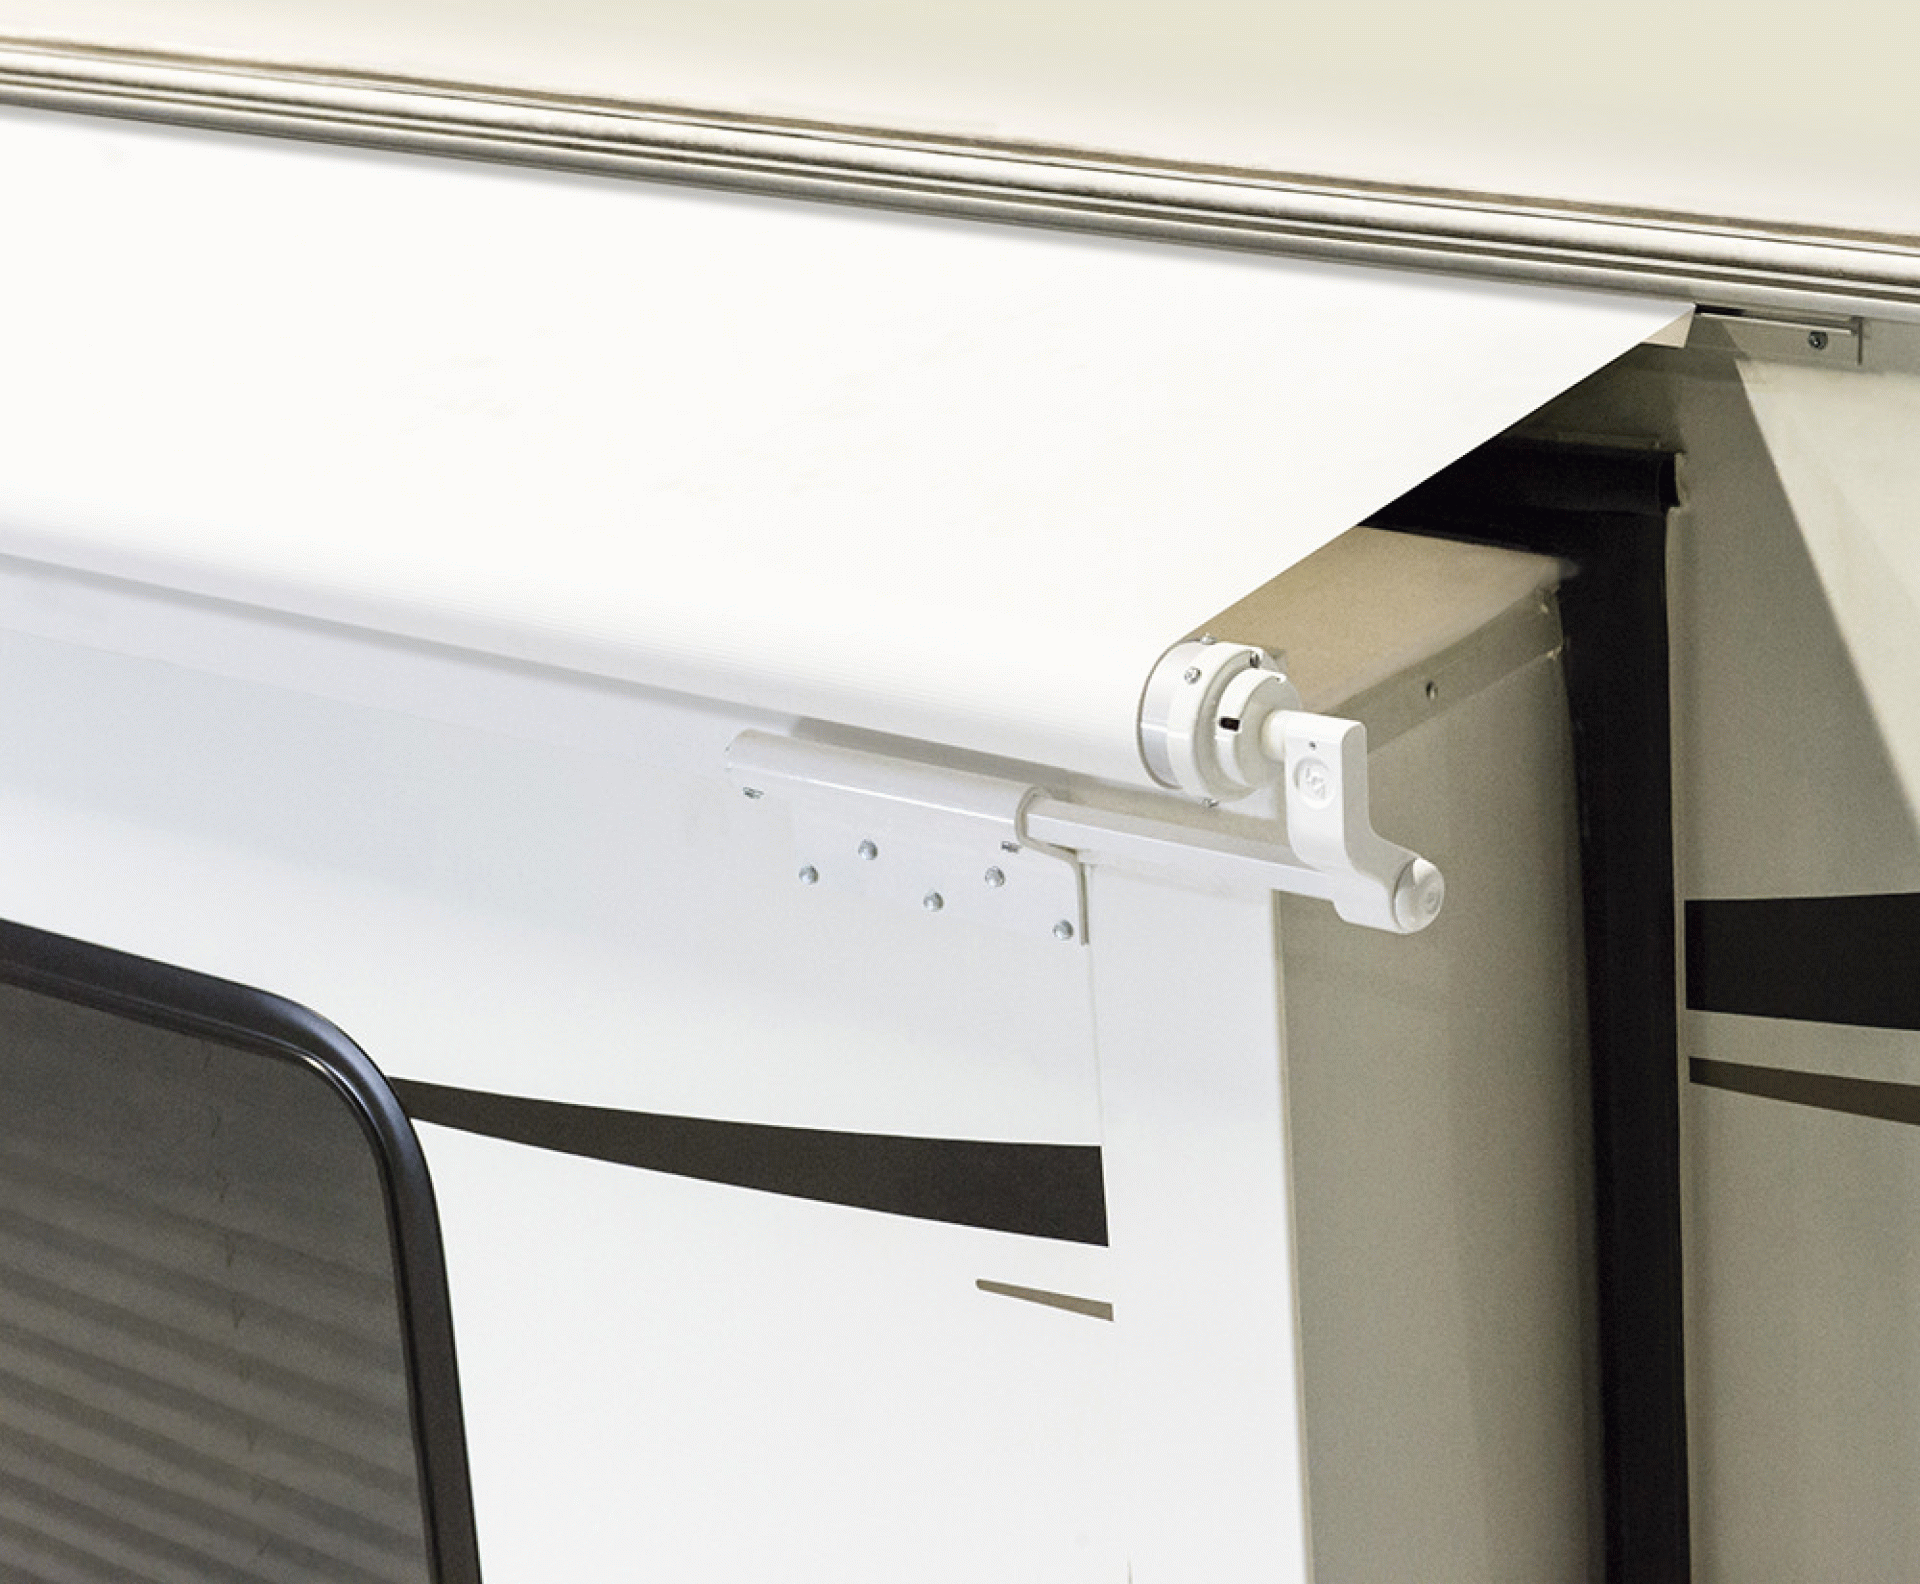 Lippert Components | V000163289 | Solera Slide Out Awning 102" Fits Room Width 92" To 97 3/4" WHITE Vinyl WHITE Hardware